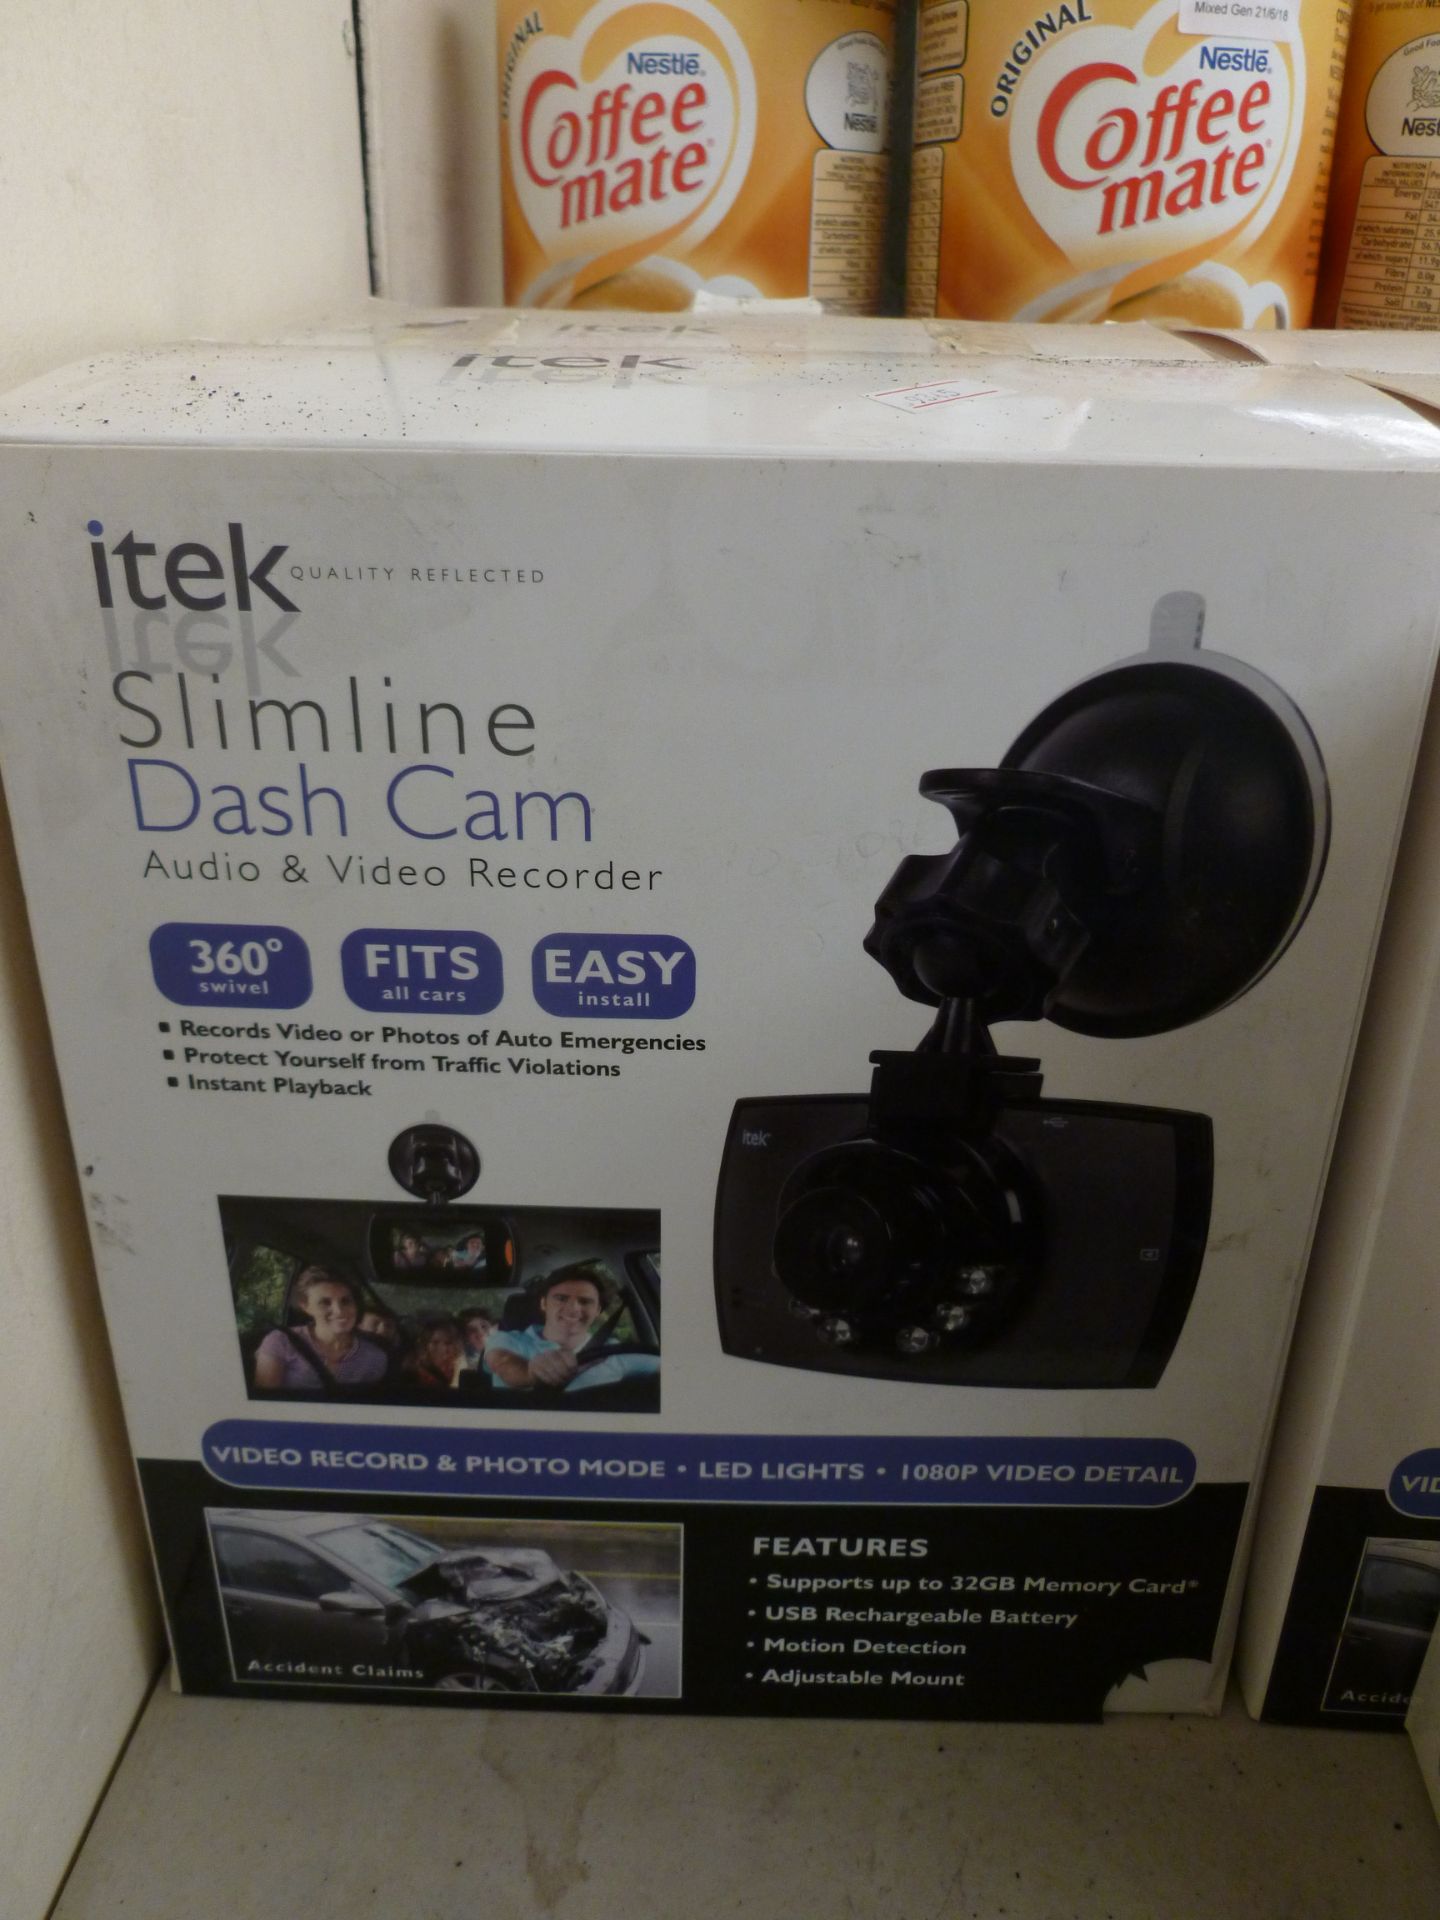 Itek slimline dash cam audio and video recorder, untested and boxed.